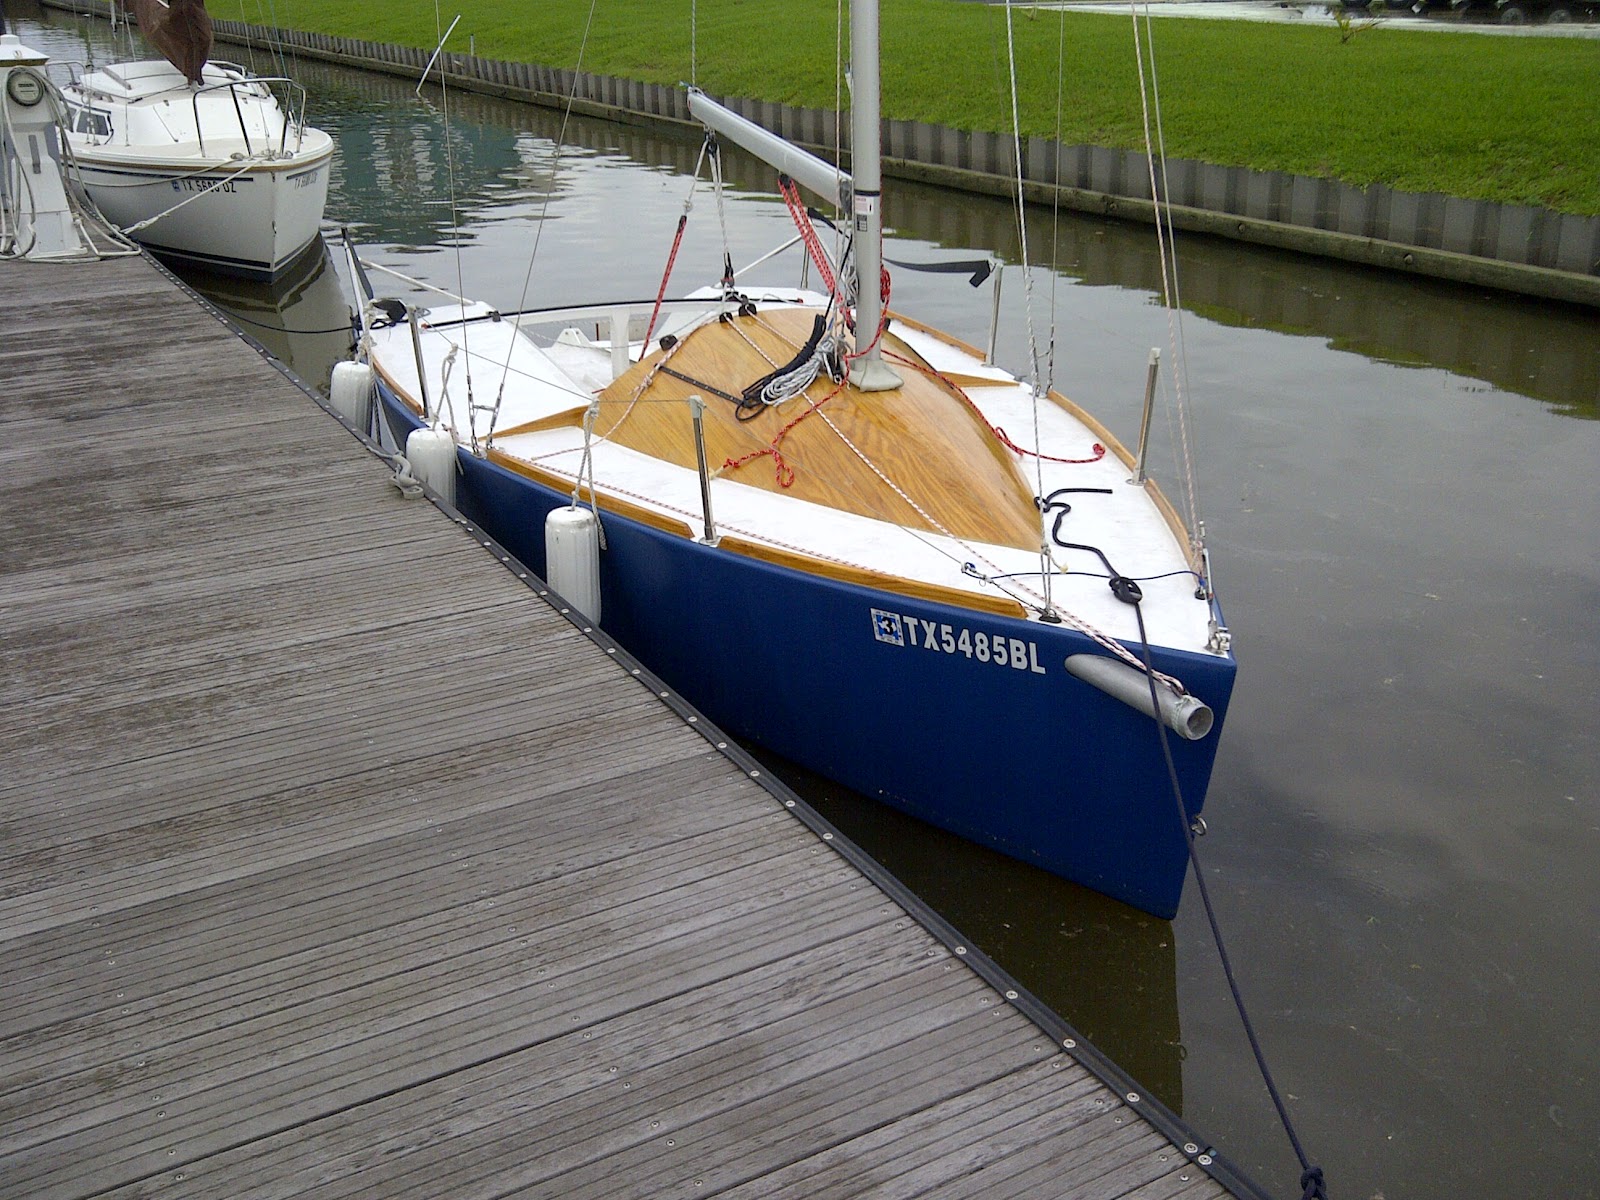 Sport Boat 18. [SB18] A trailerable high performance sail boat with 